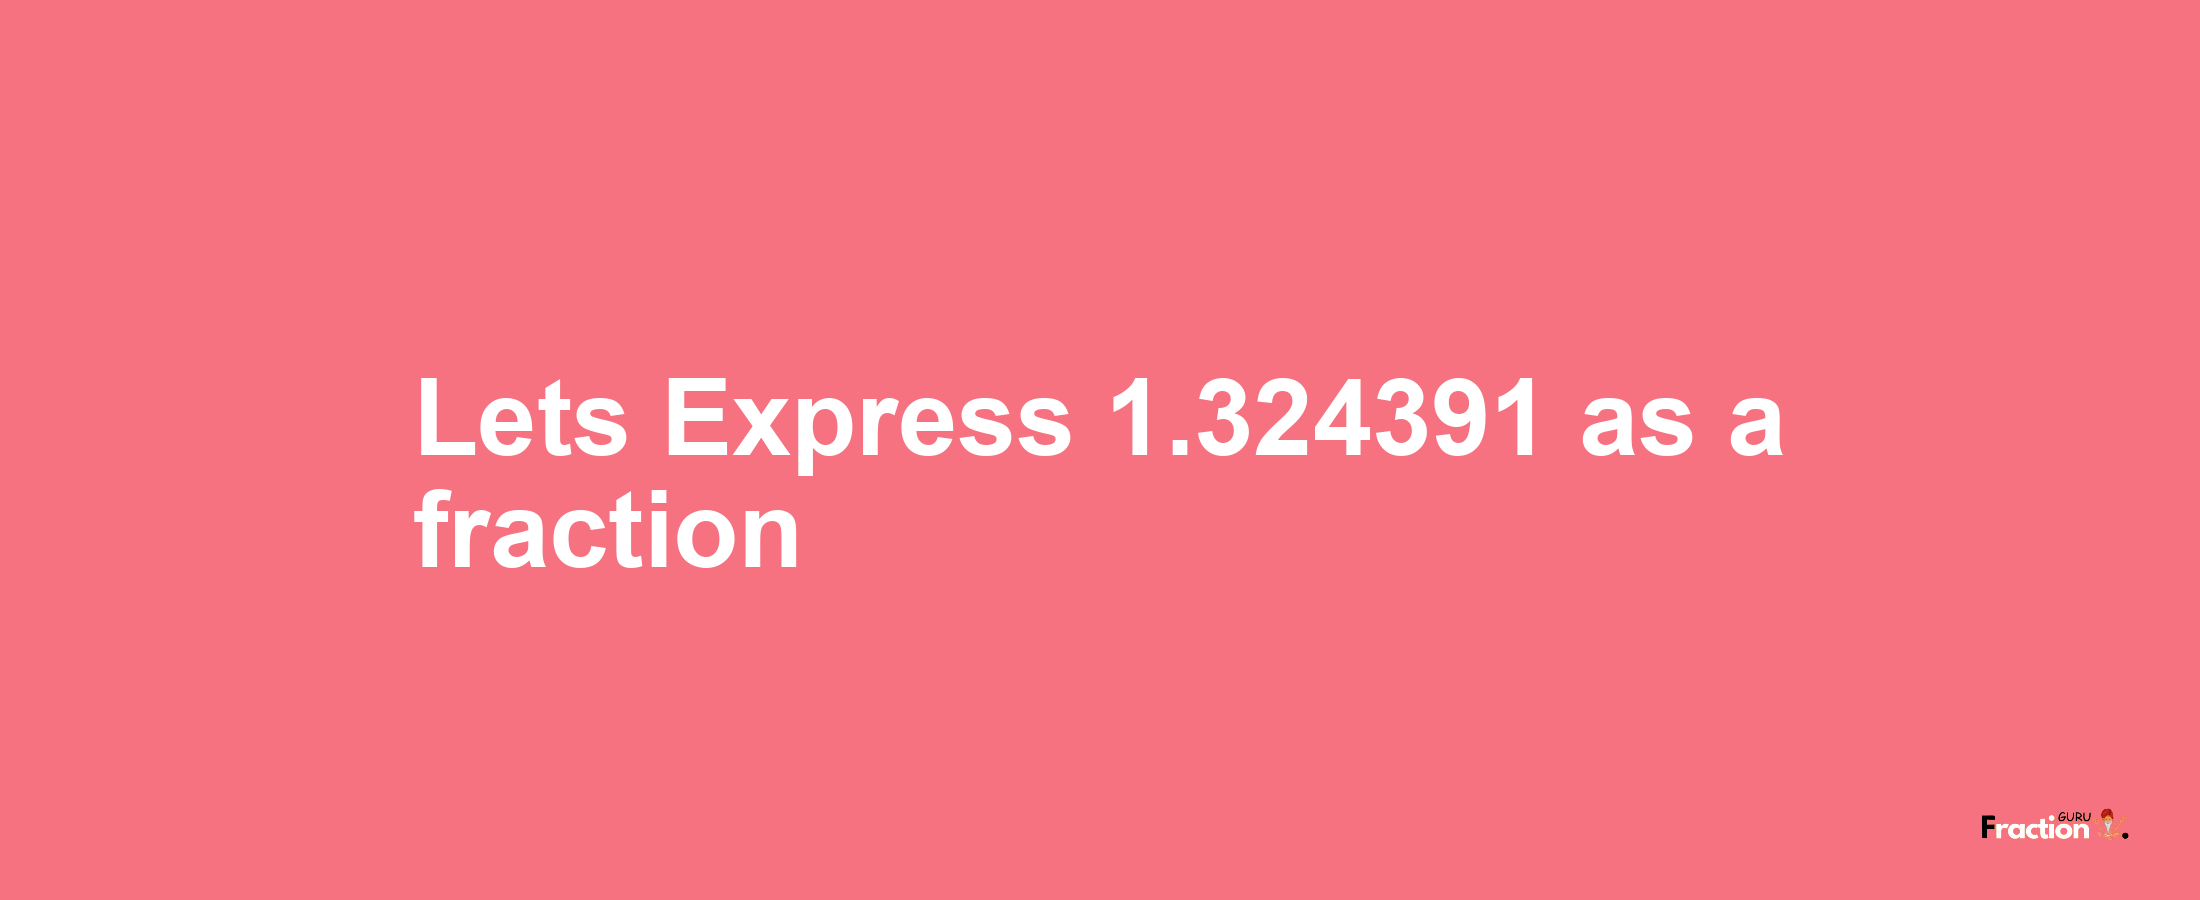 Lets Express 1.324391 as afraction